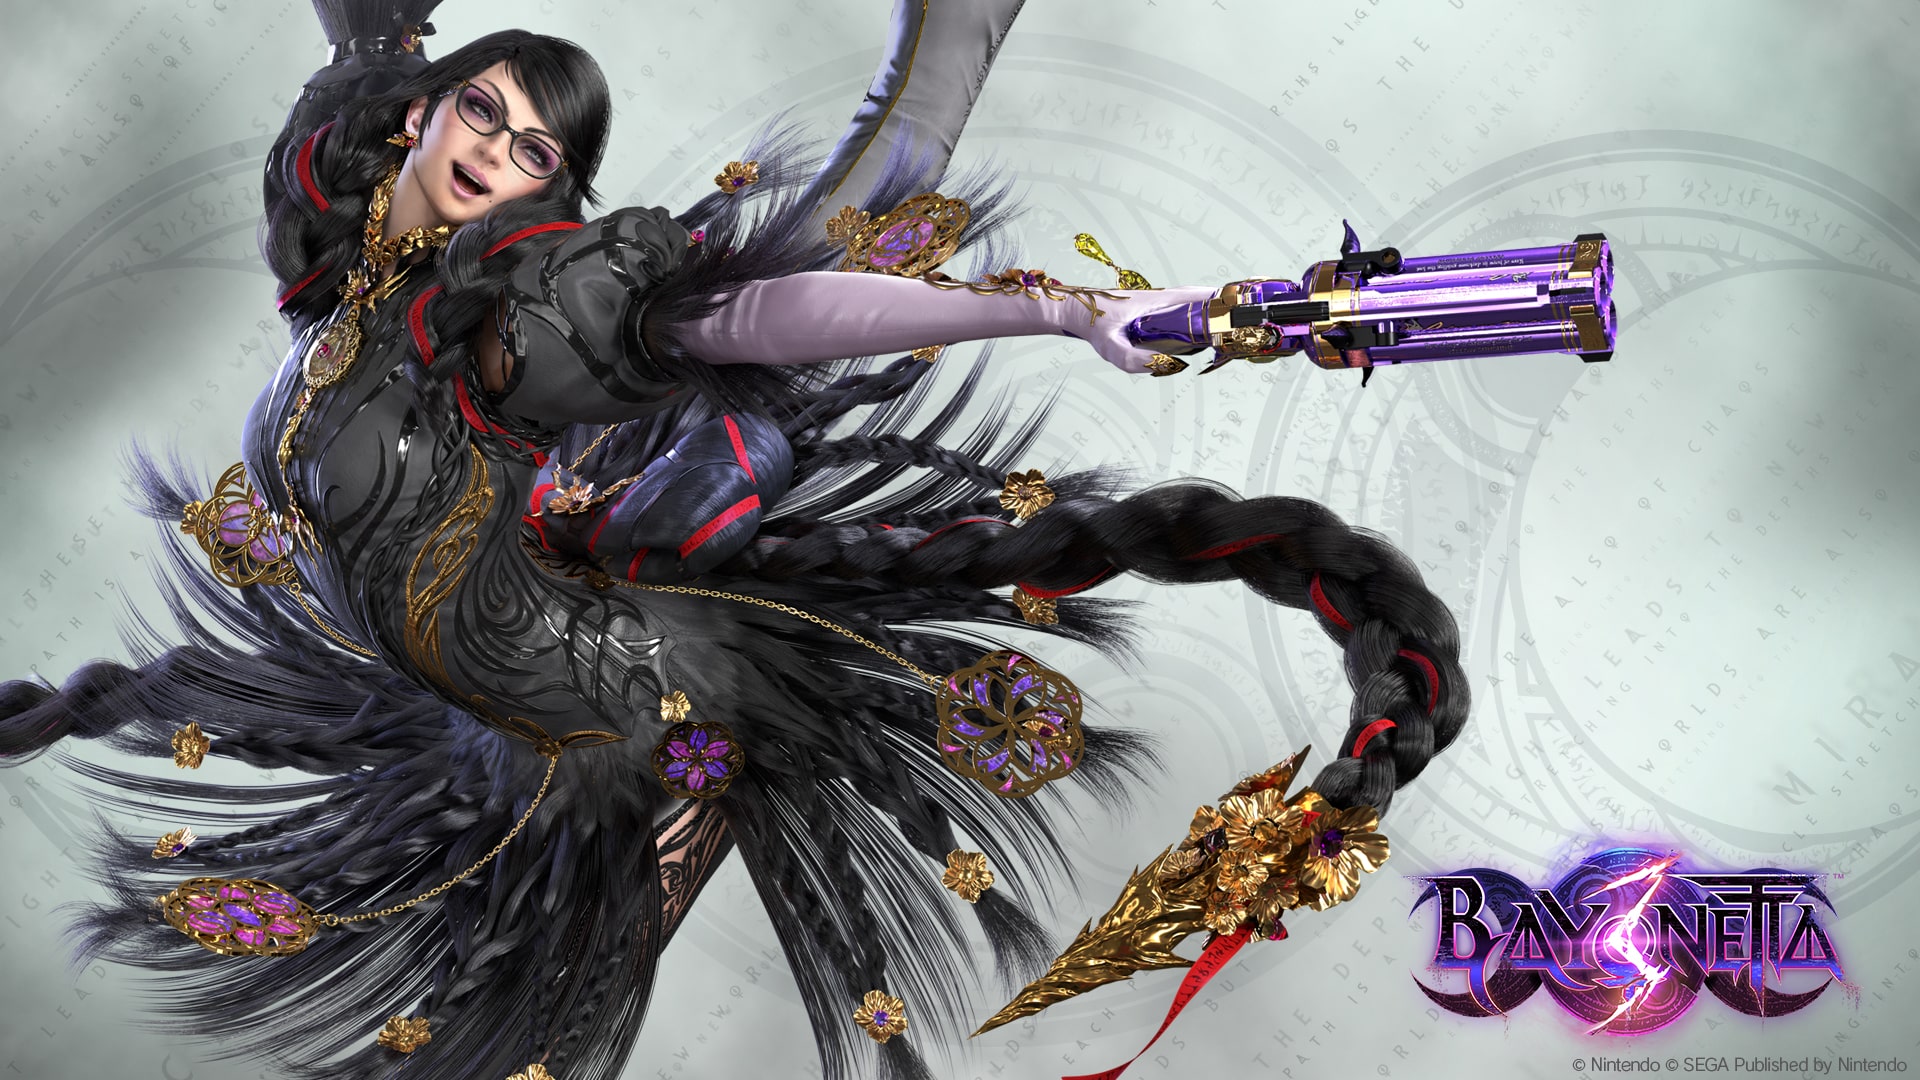 Kamiya says he's forever indebted to Nintendo for Bayonetta 3